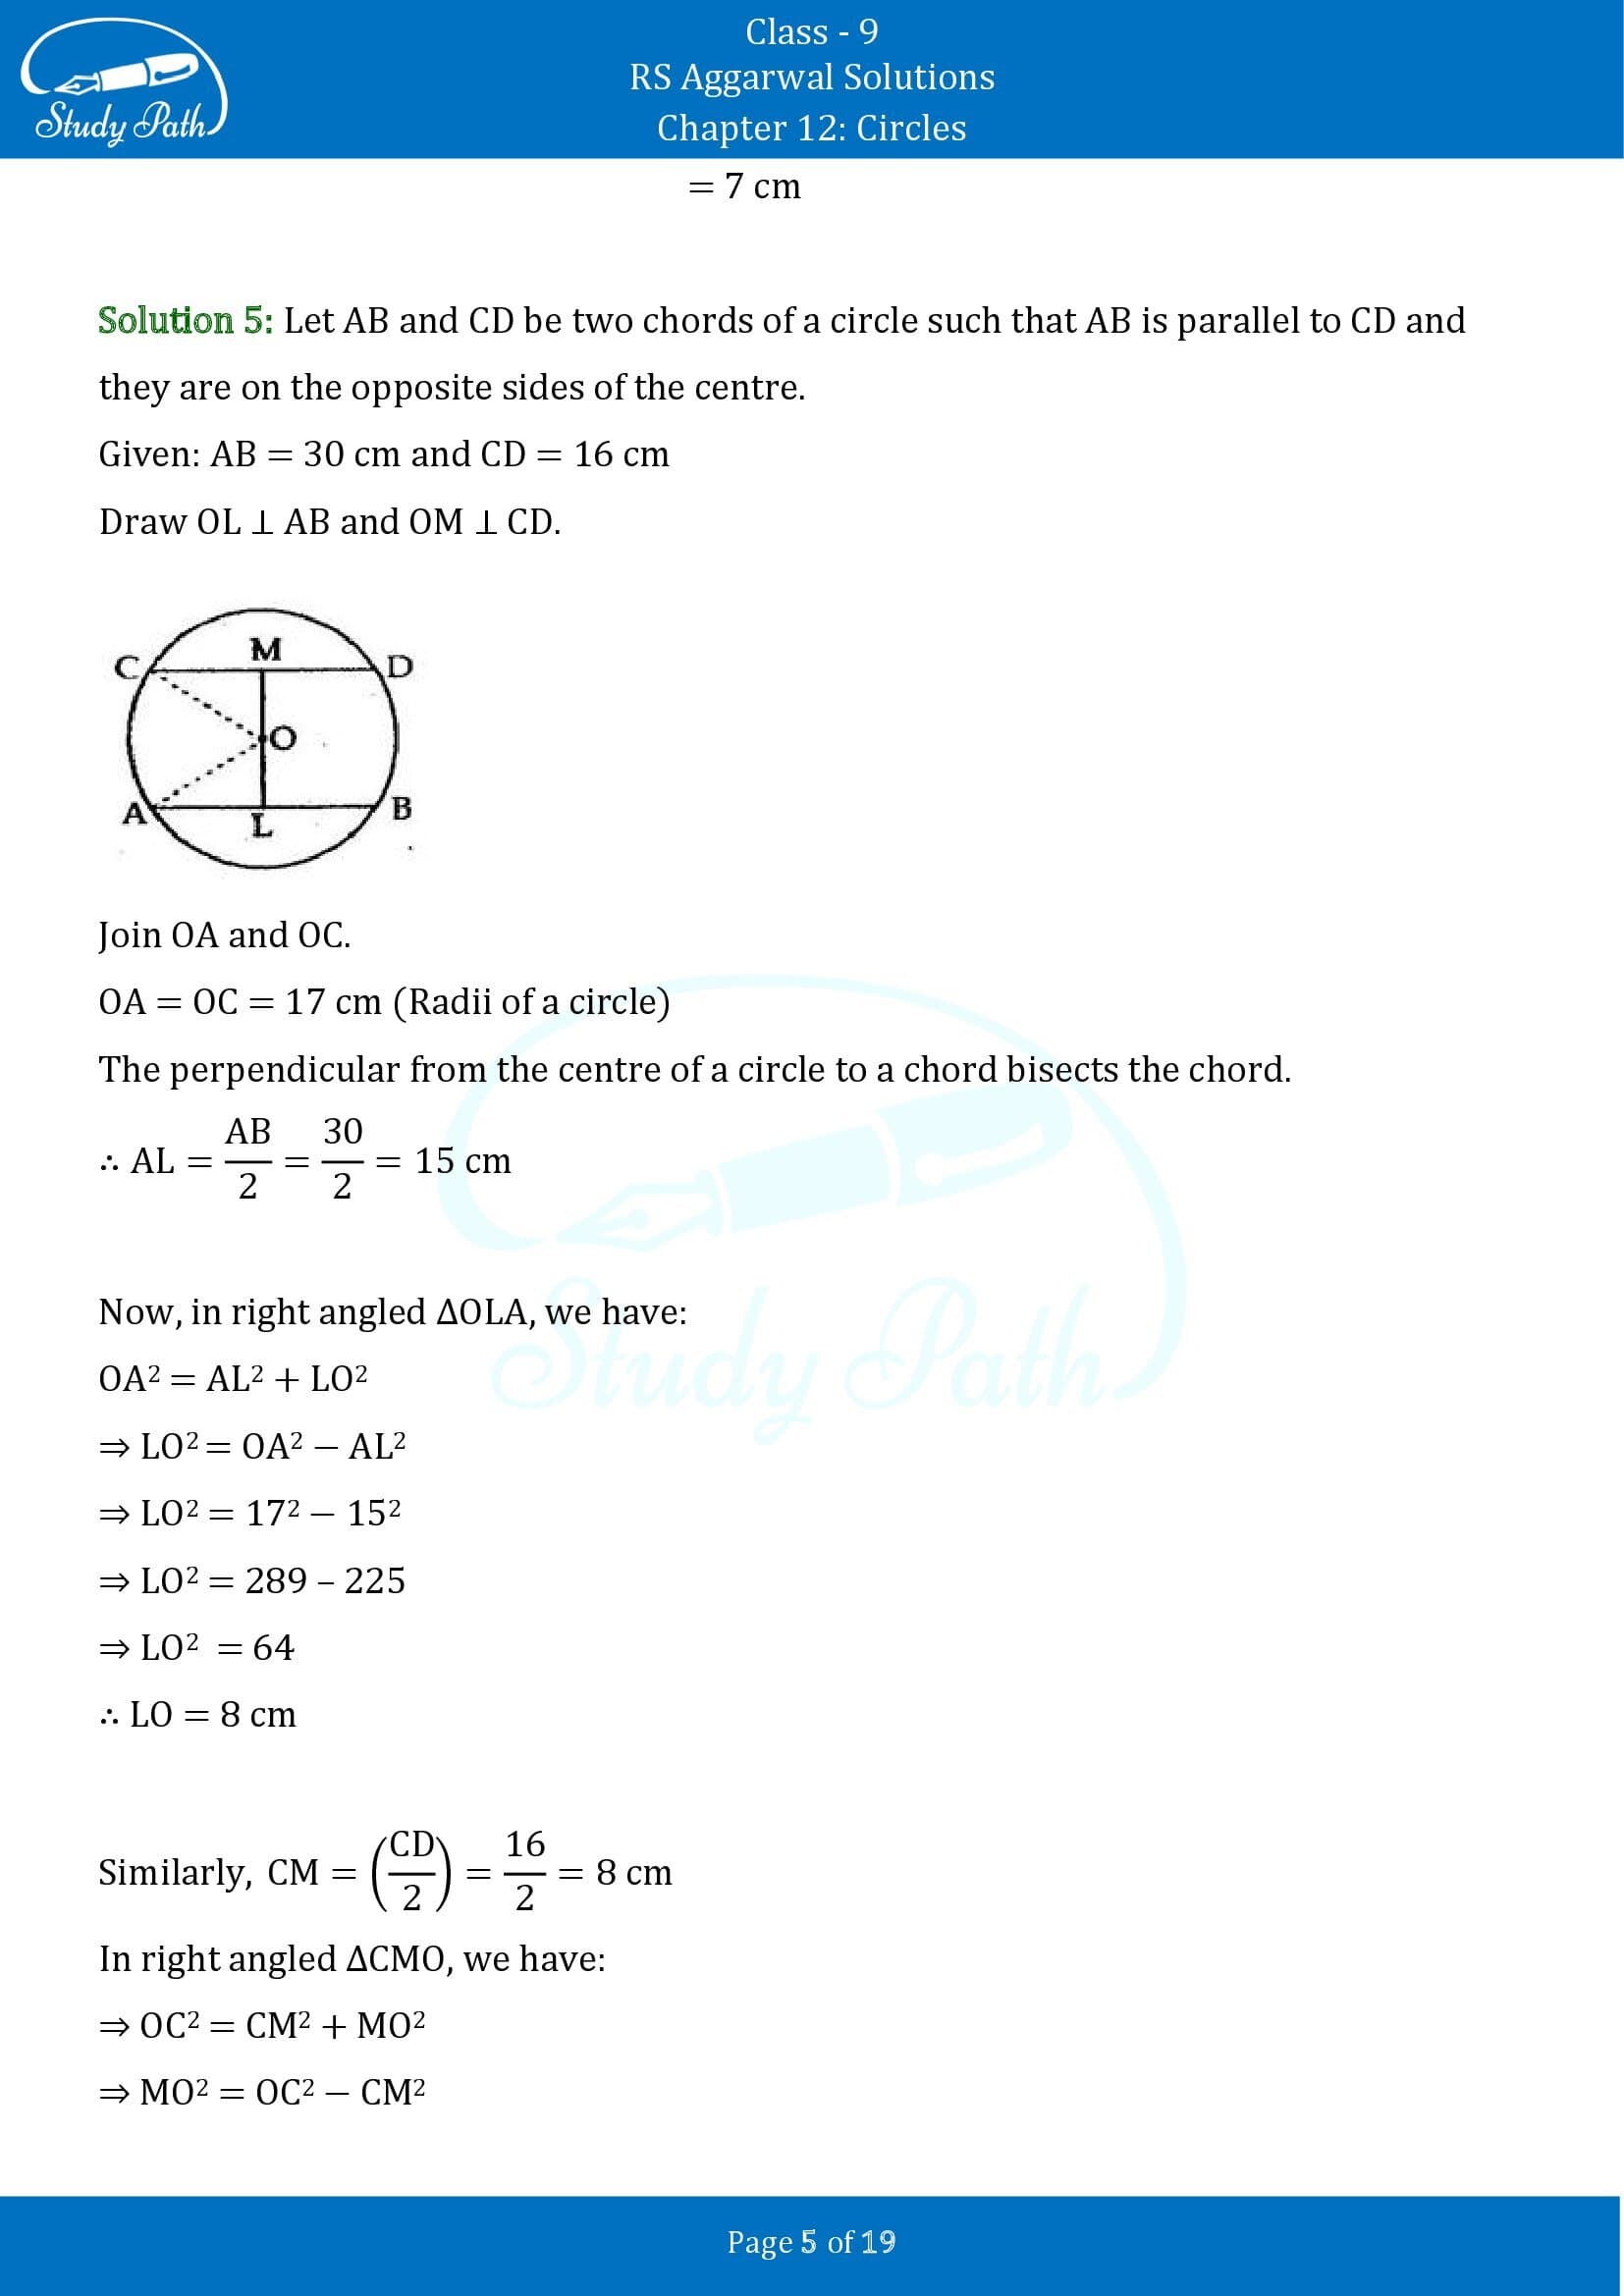 RS Aggarwal Solutions Class 9 Chapter 12 Circles Exercise 12A 00005